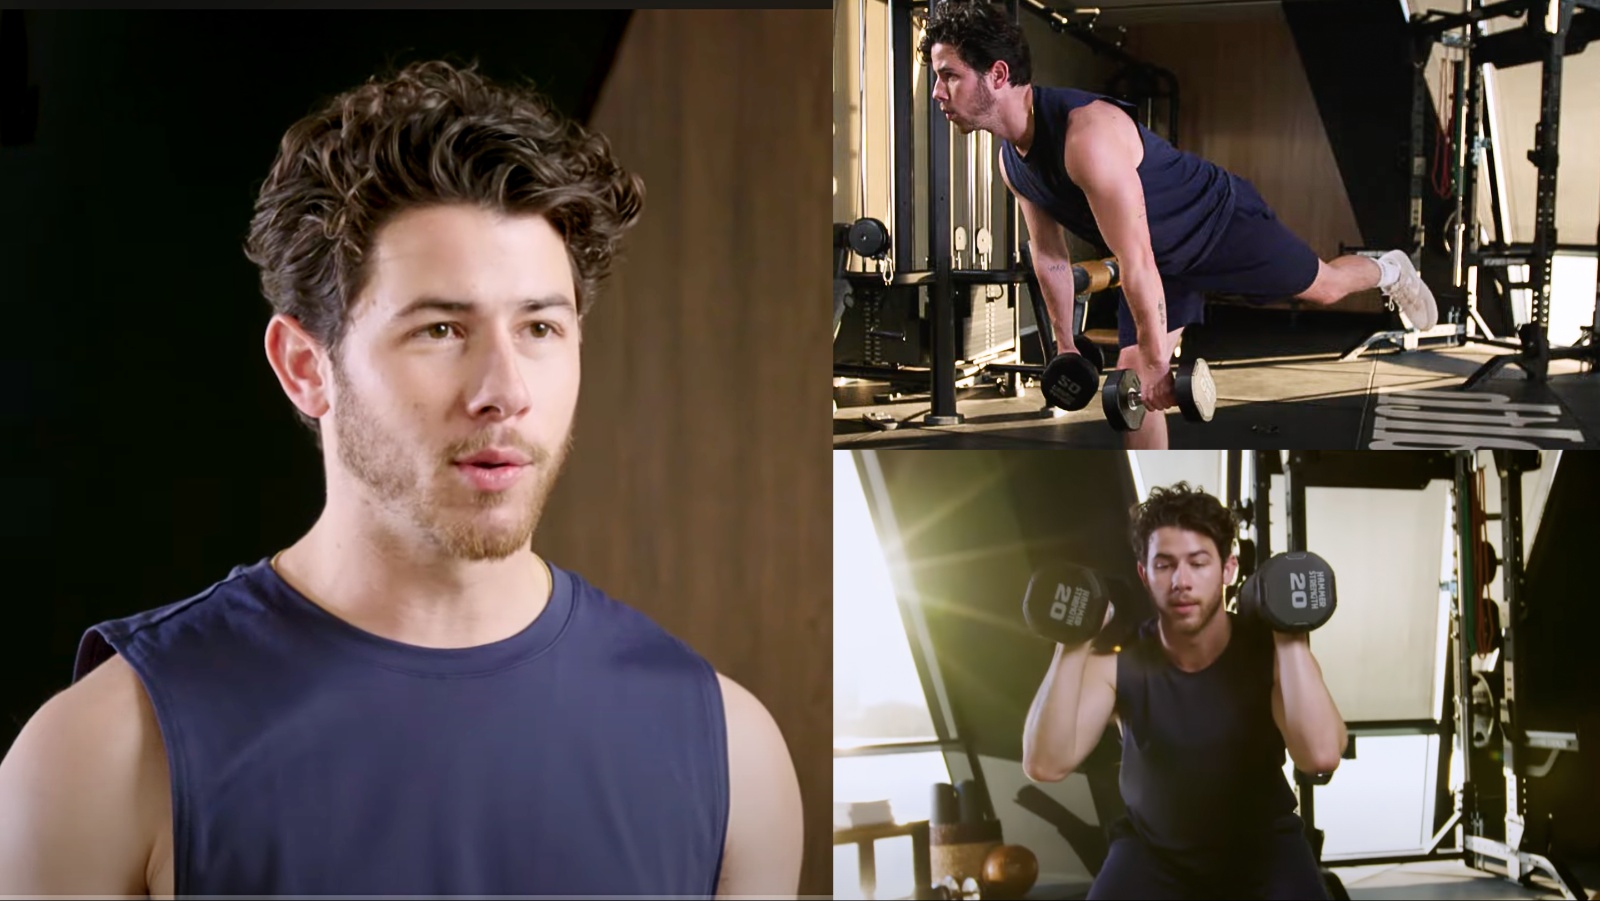 🔴 Nick Jonas Shows His Muscle Body During Workout